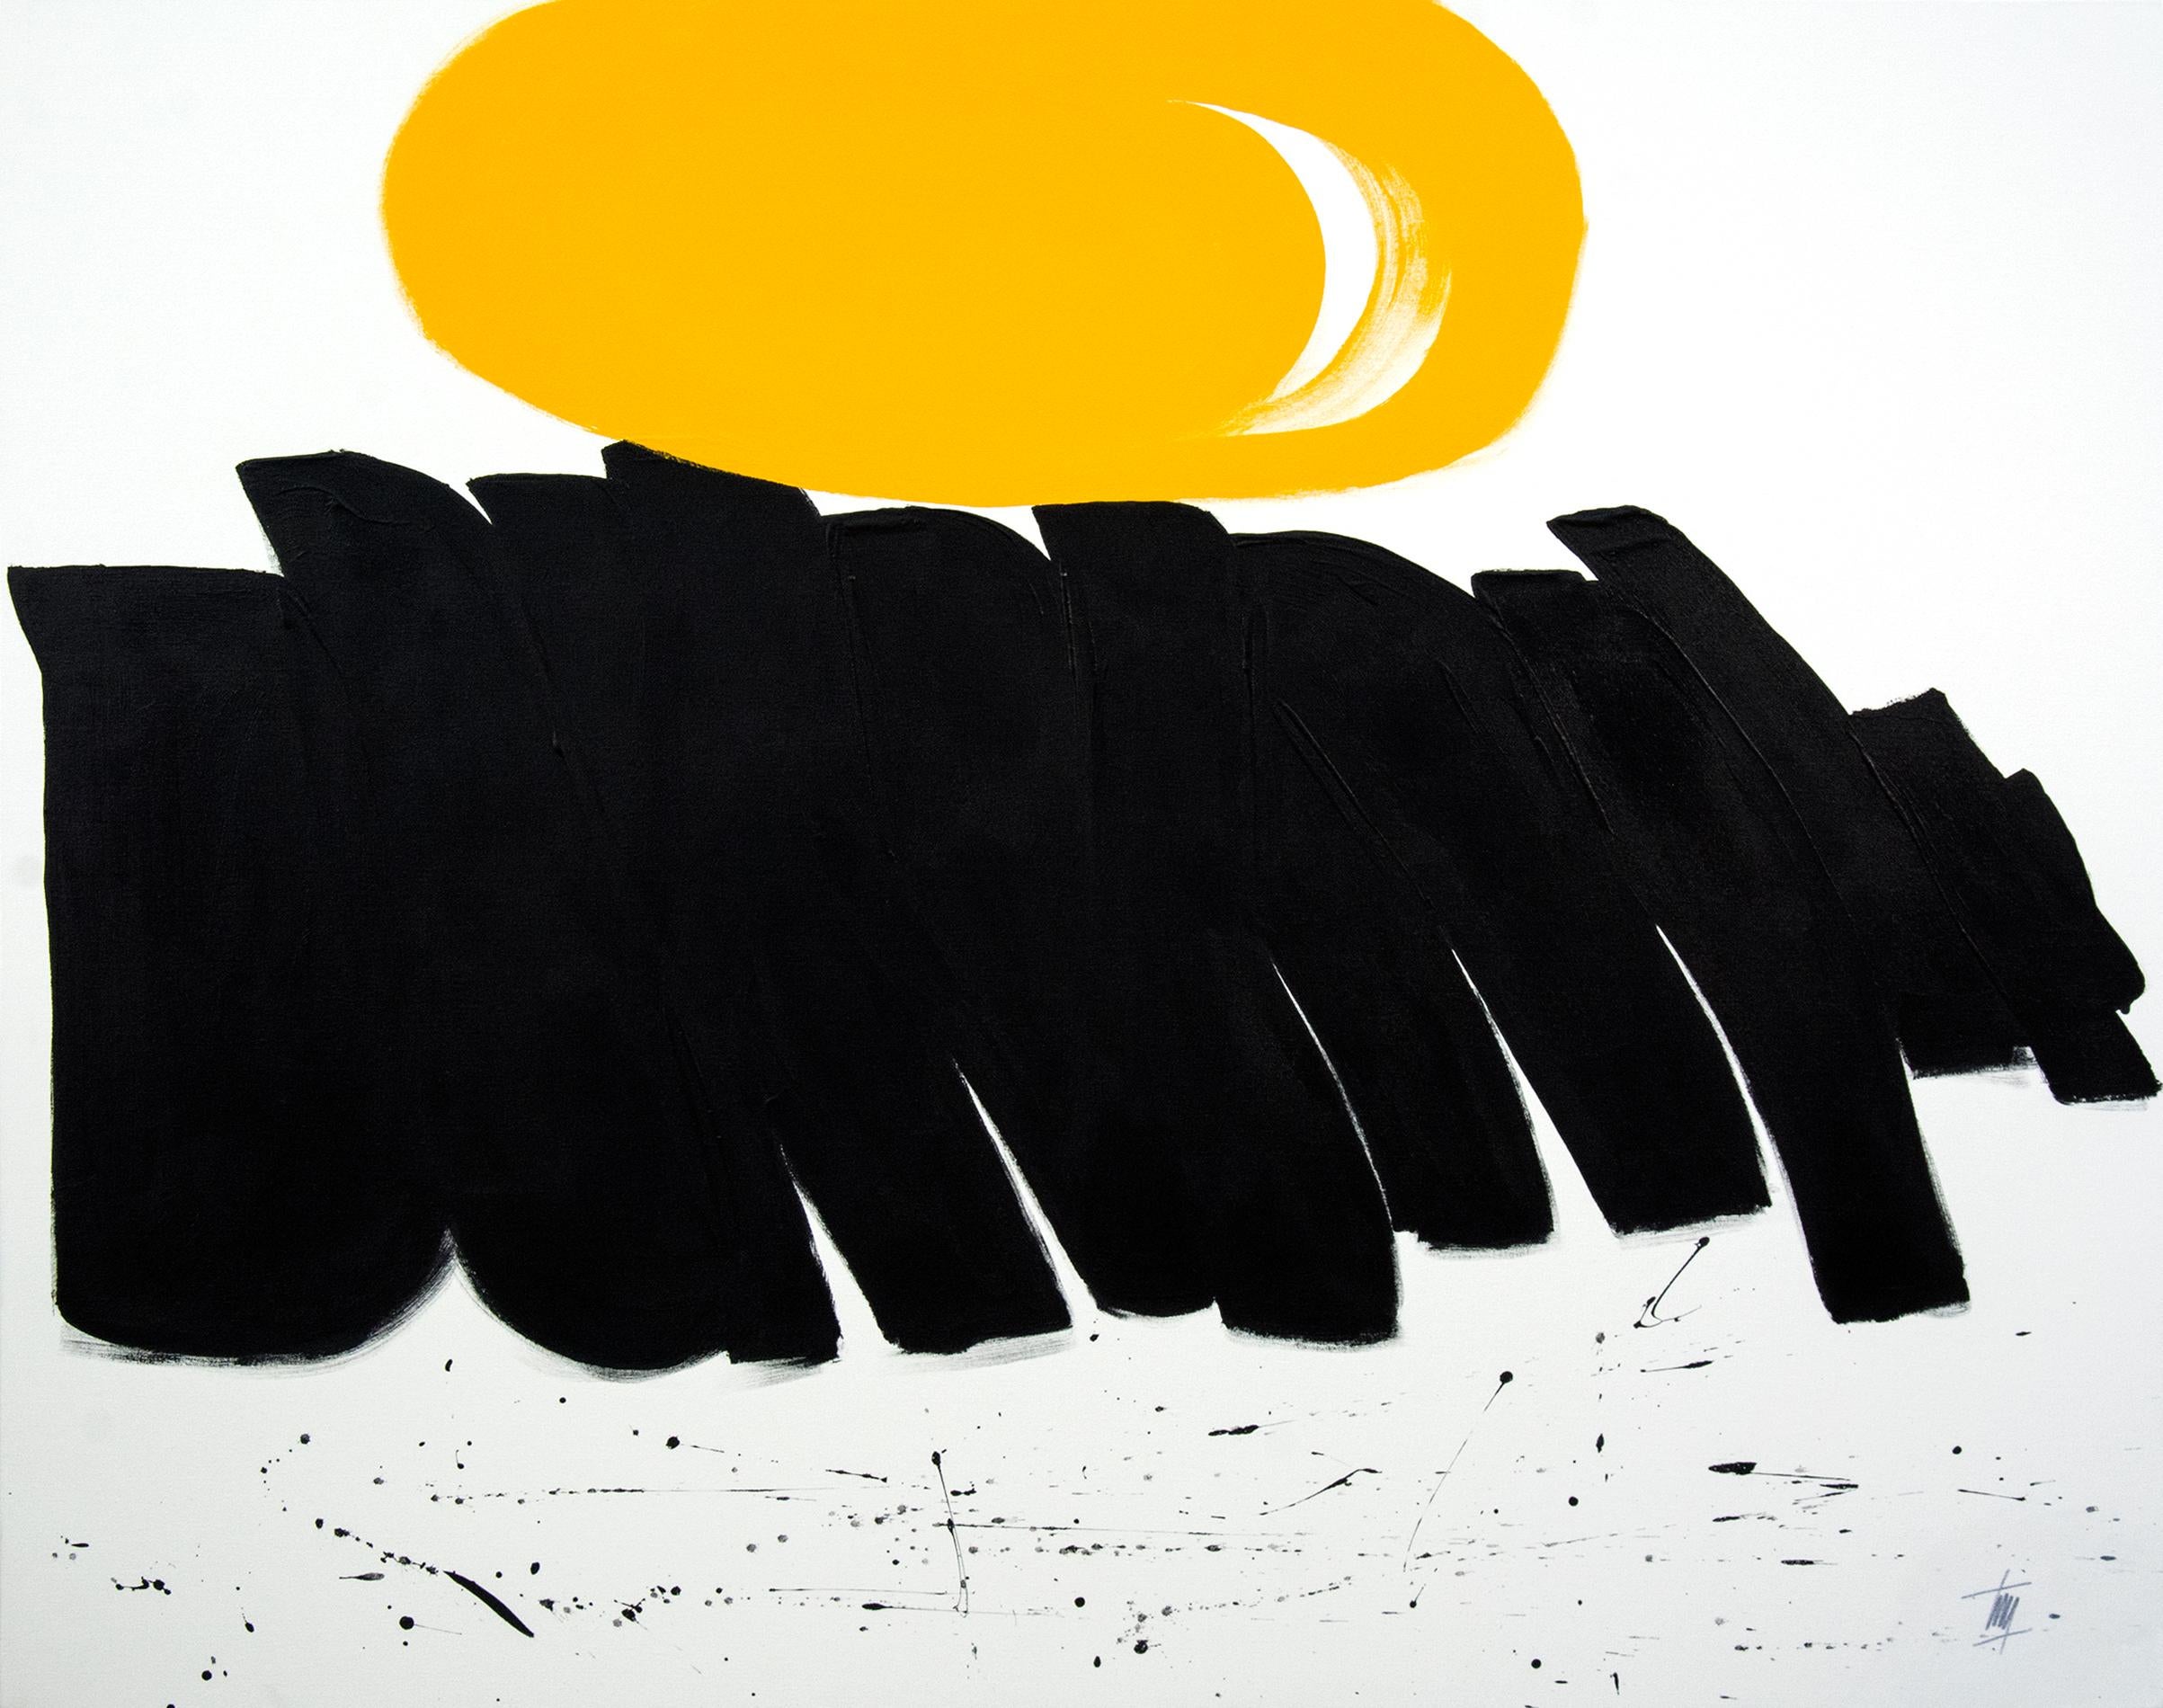 Procession - bold, black, white, yellow, abstract minimalist, acrylic on canvas